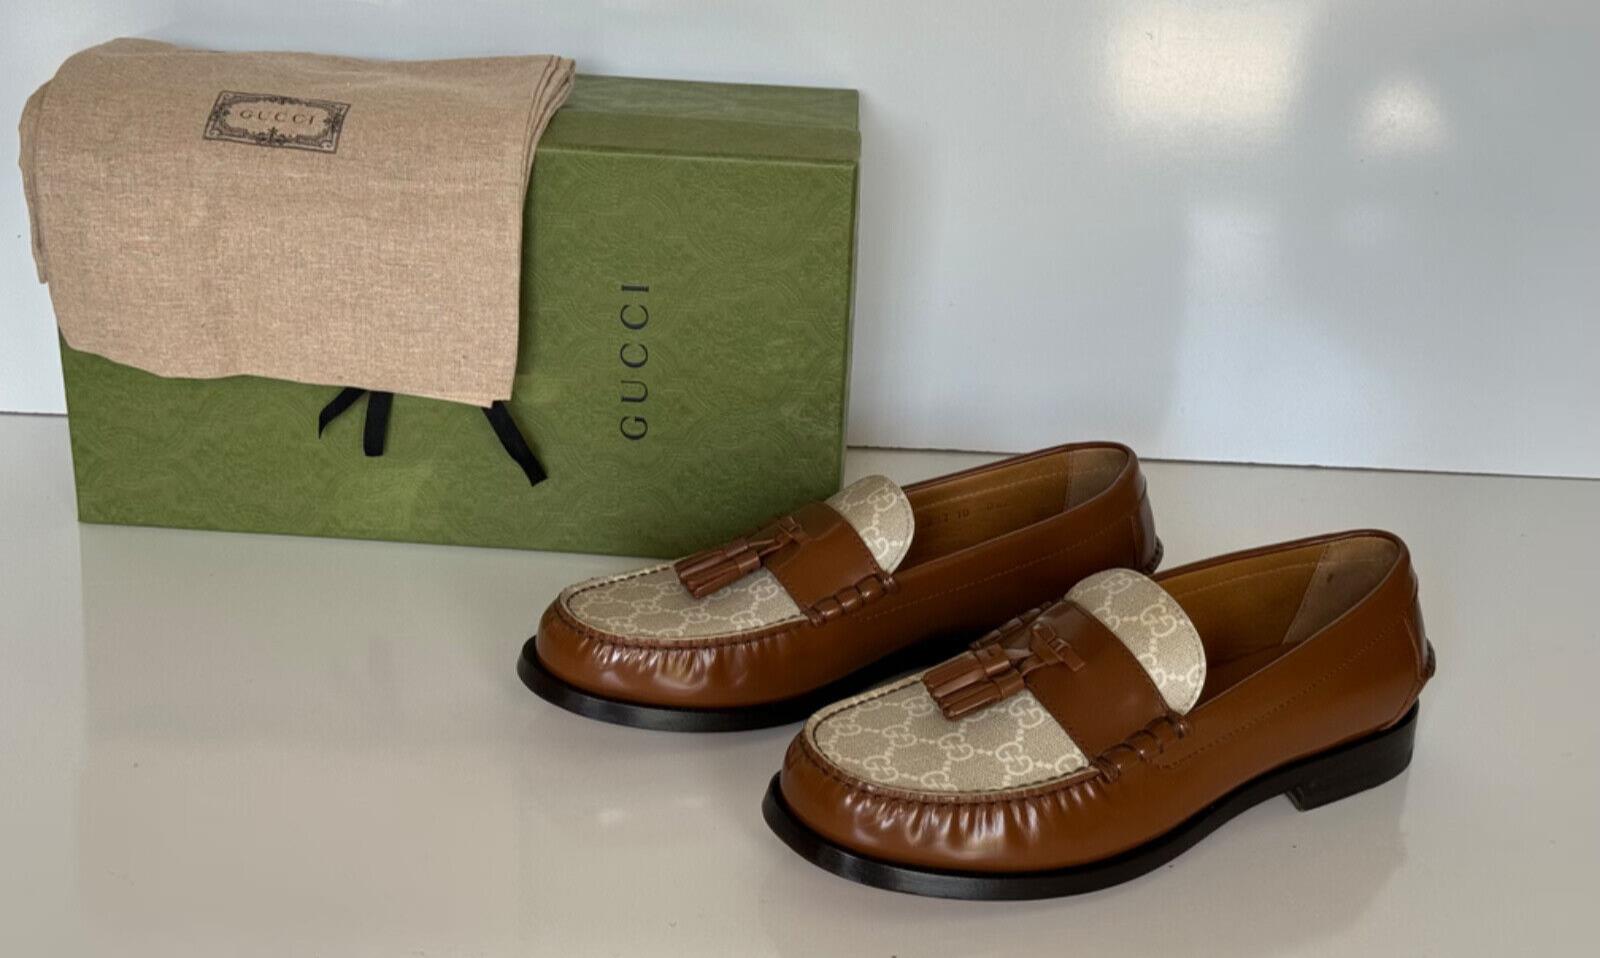 Gucci Men’s Tassel Moccasin Leather Monogram Shoes Brown 11 US (10 Gucci) 673817